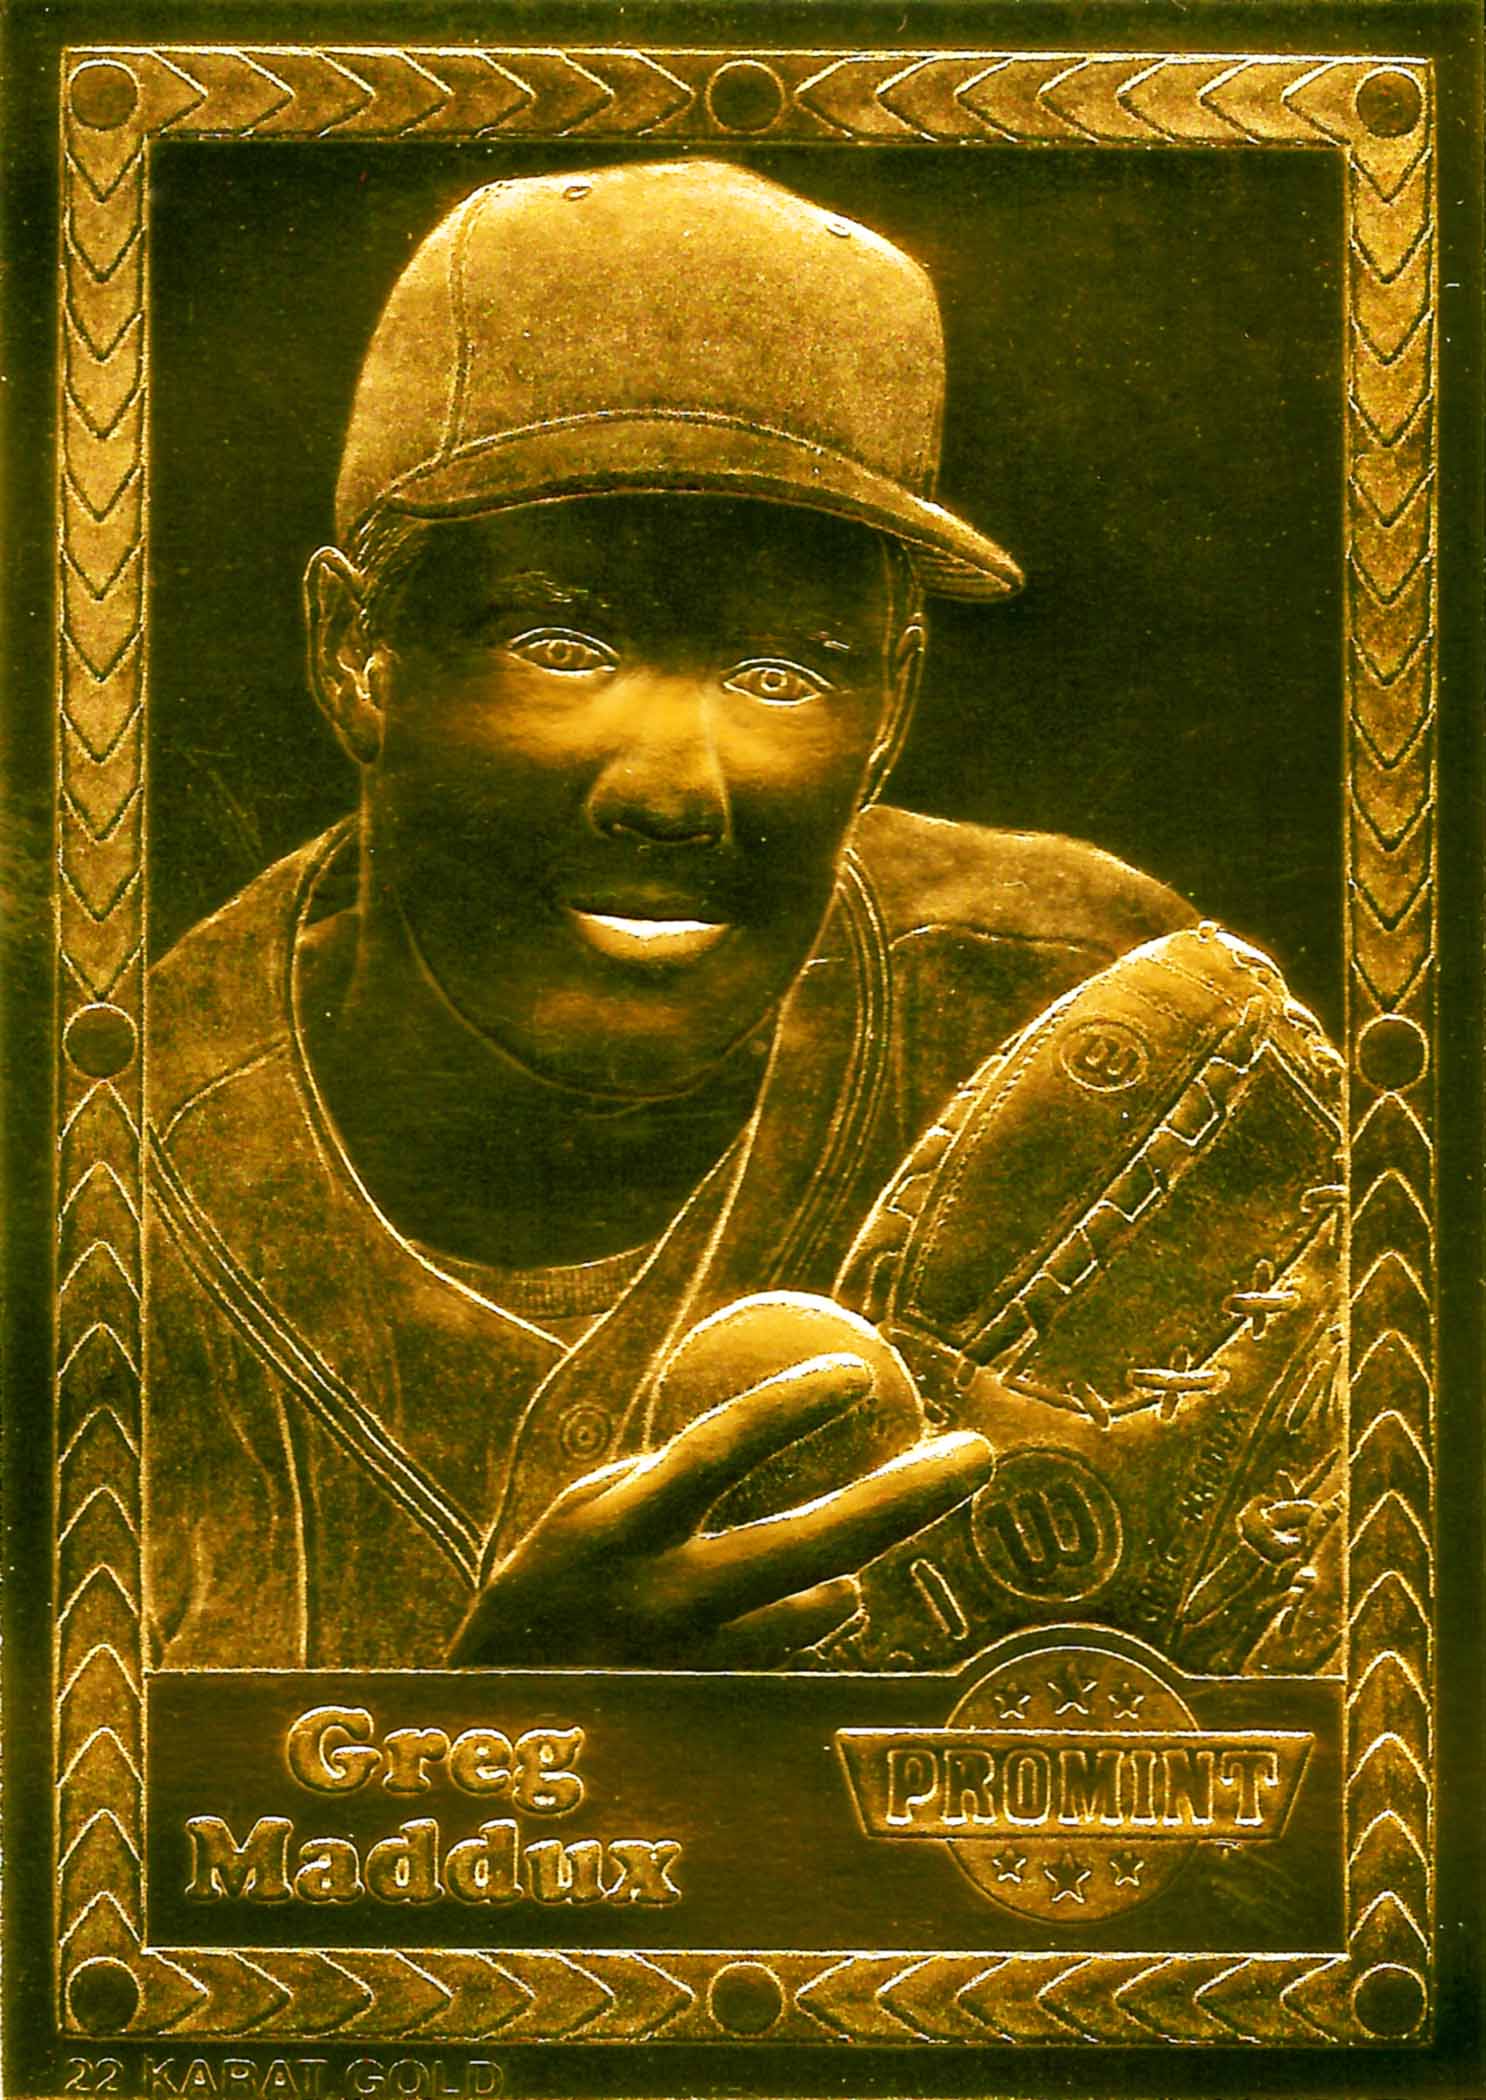 1996 Score Dugout Collection Artist's Proofs